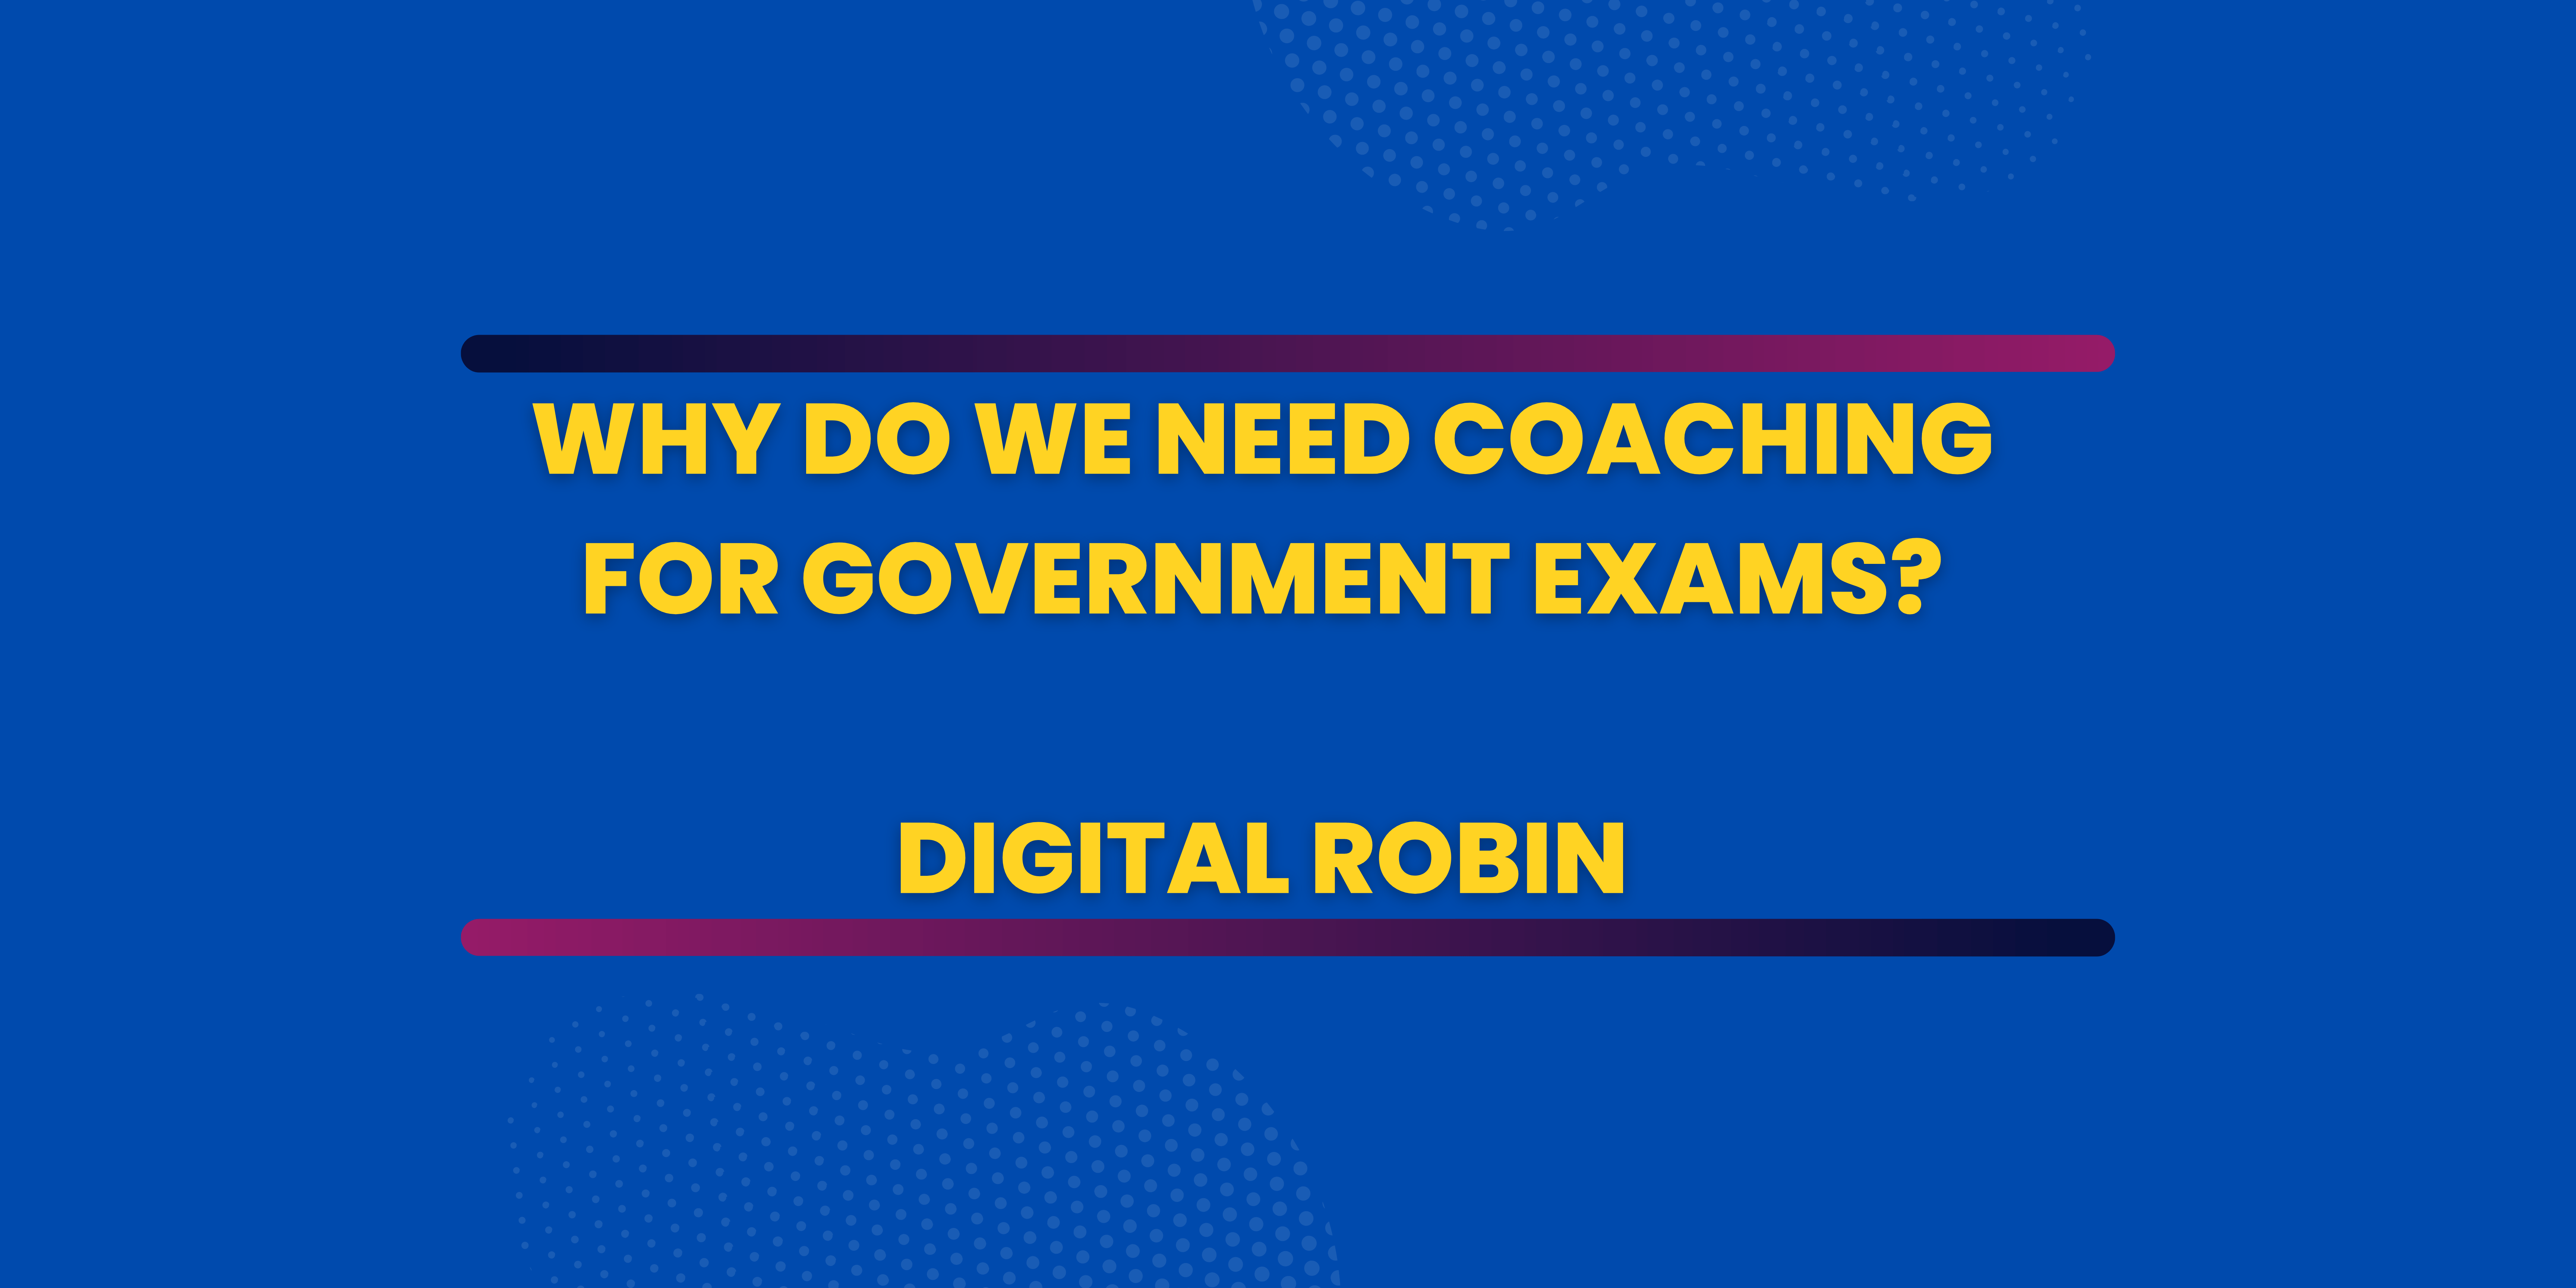 Why do we need coaching for government exams